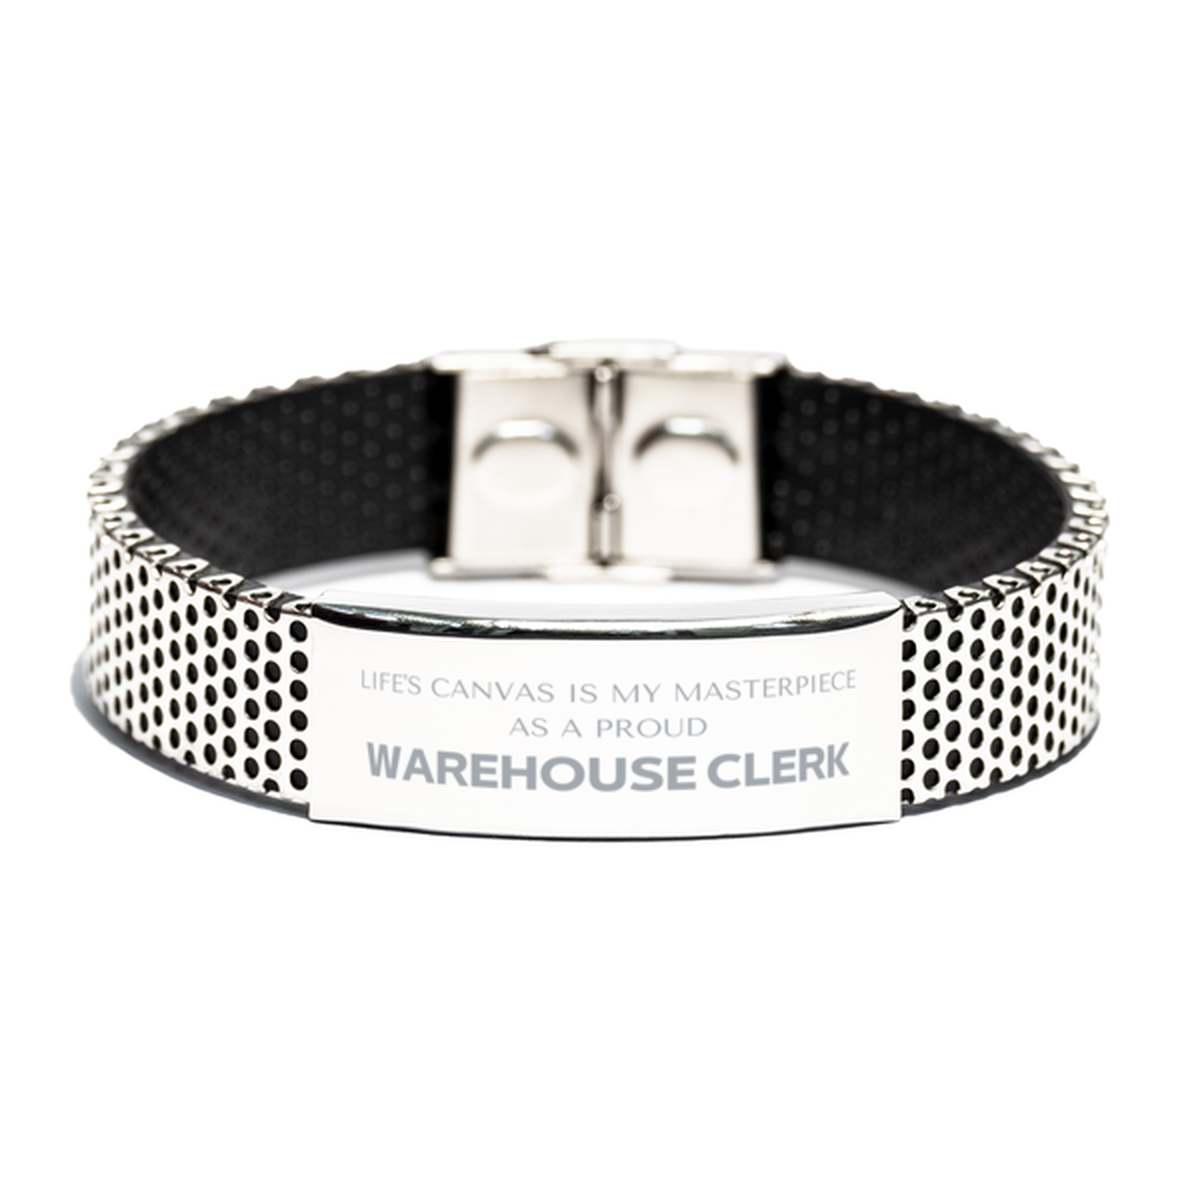 Proud Warehouse Clerk Gifts, Life's canvas is my masterpiece, Epic Birthday Christmas Unique Stainless Steel Bracelet For Warehouse Clerk, Coworkers, Men, Women, Friends